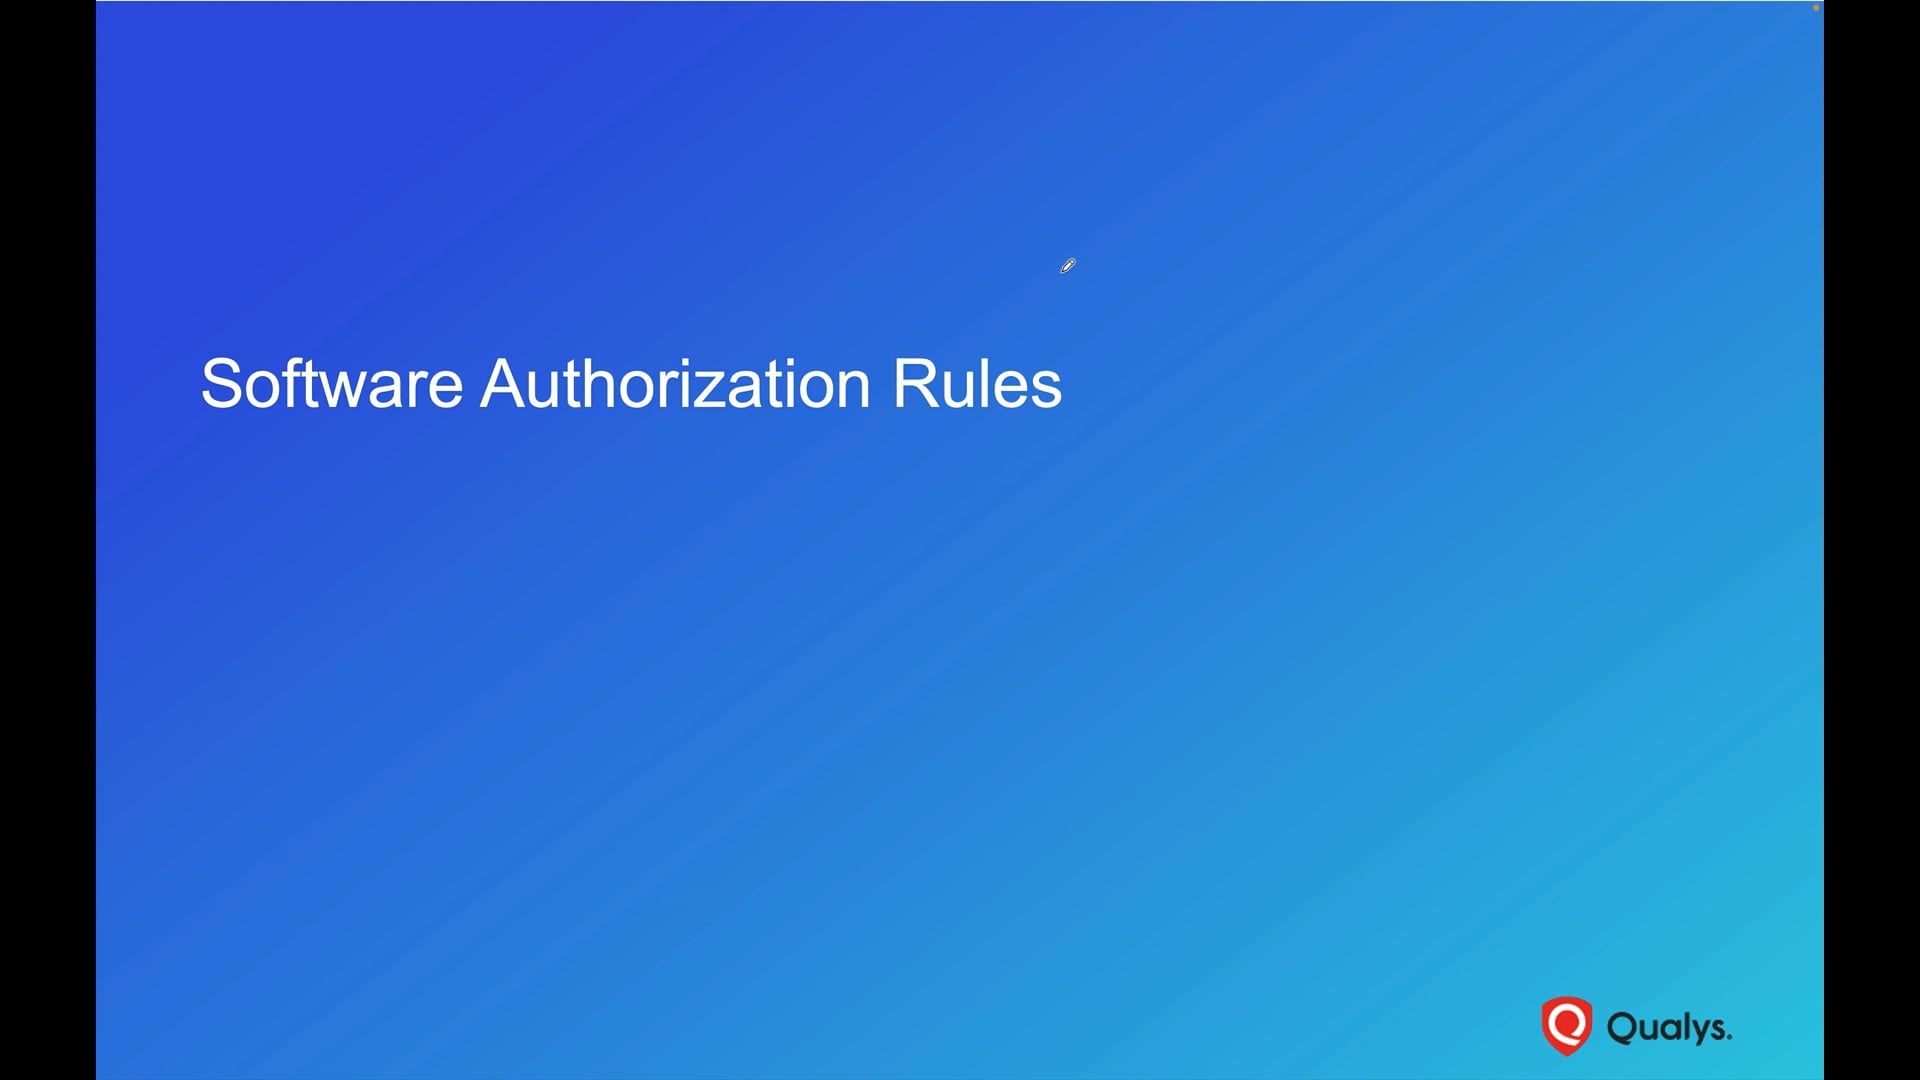 Software Authorization Rules